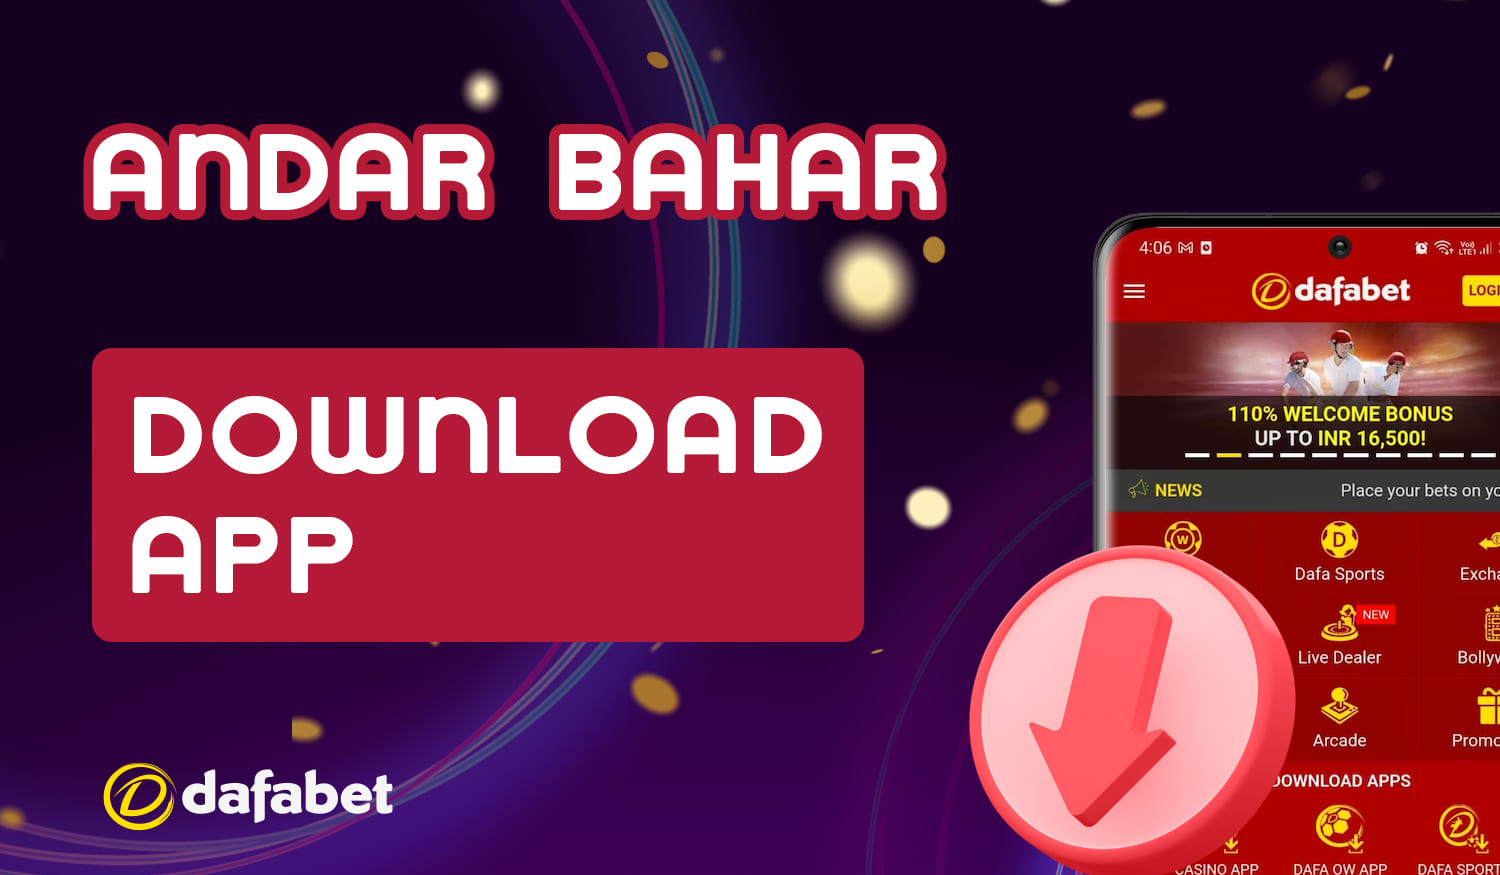 How to download the Dafabet mobile app to play online Andar Bahar